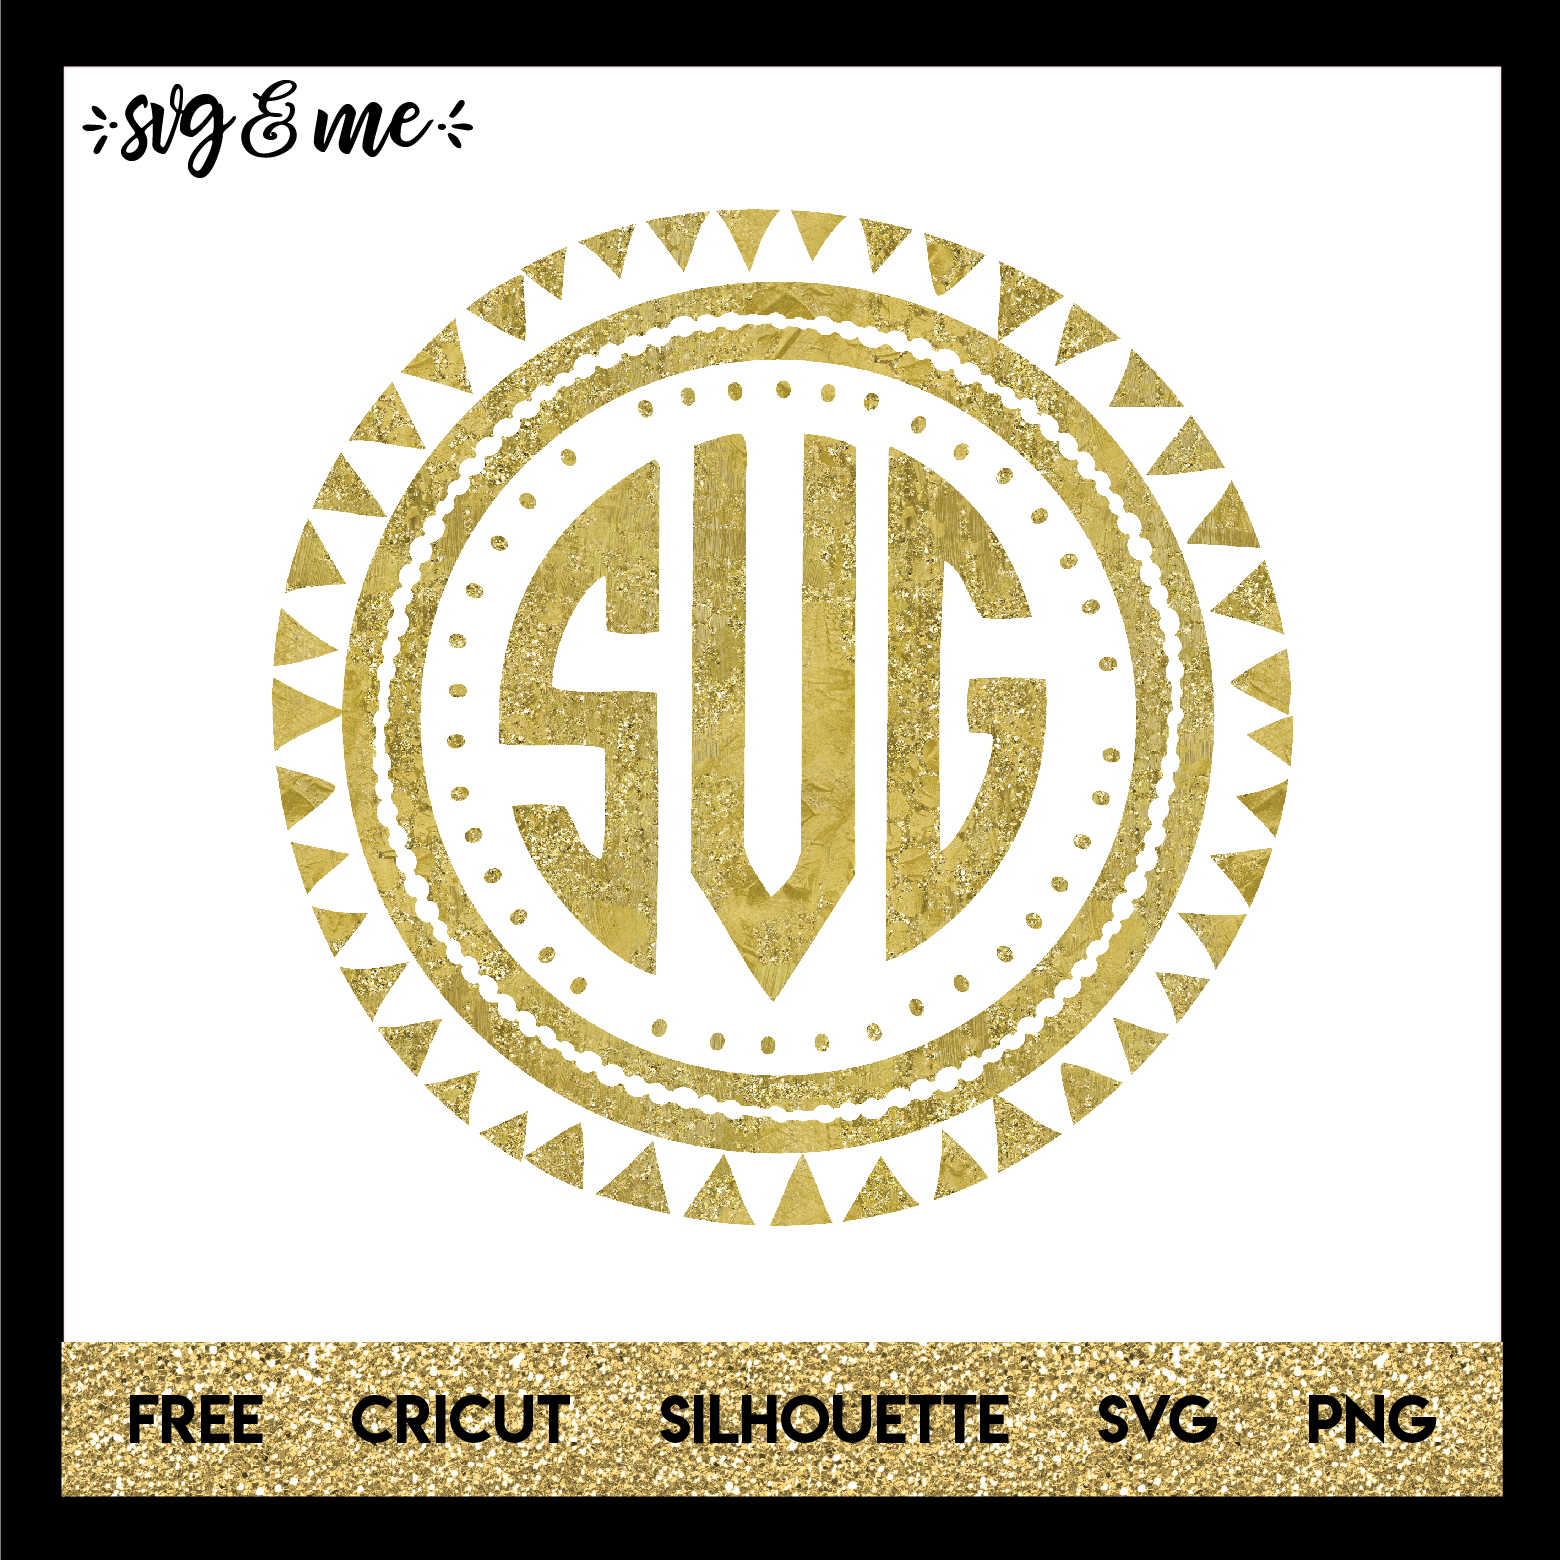 FREE SVG CUT FILE for Cricut, Silhouette and more - Gold Aztec Geo Monogram Frame SVG